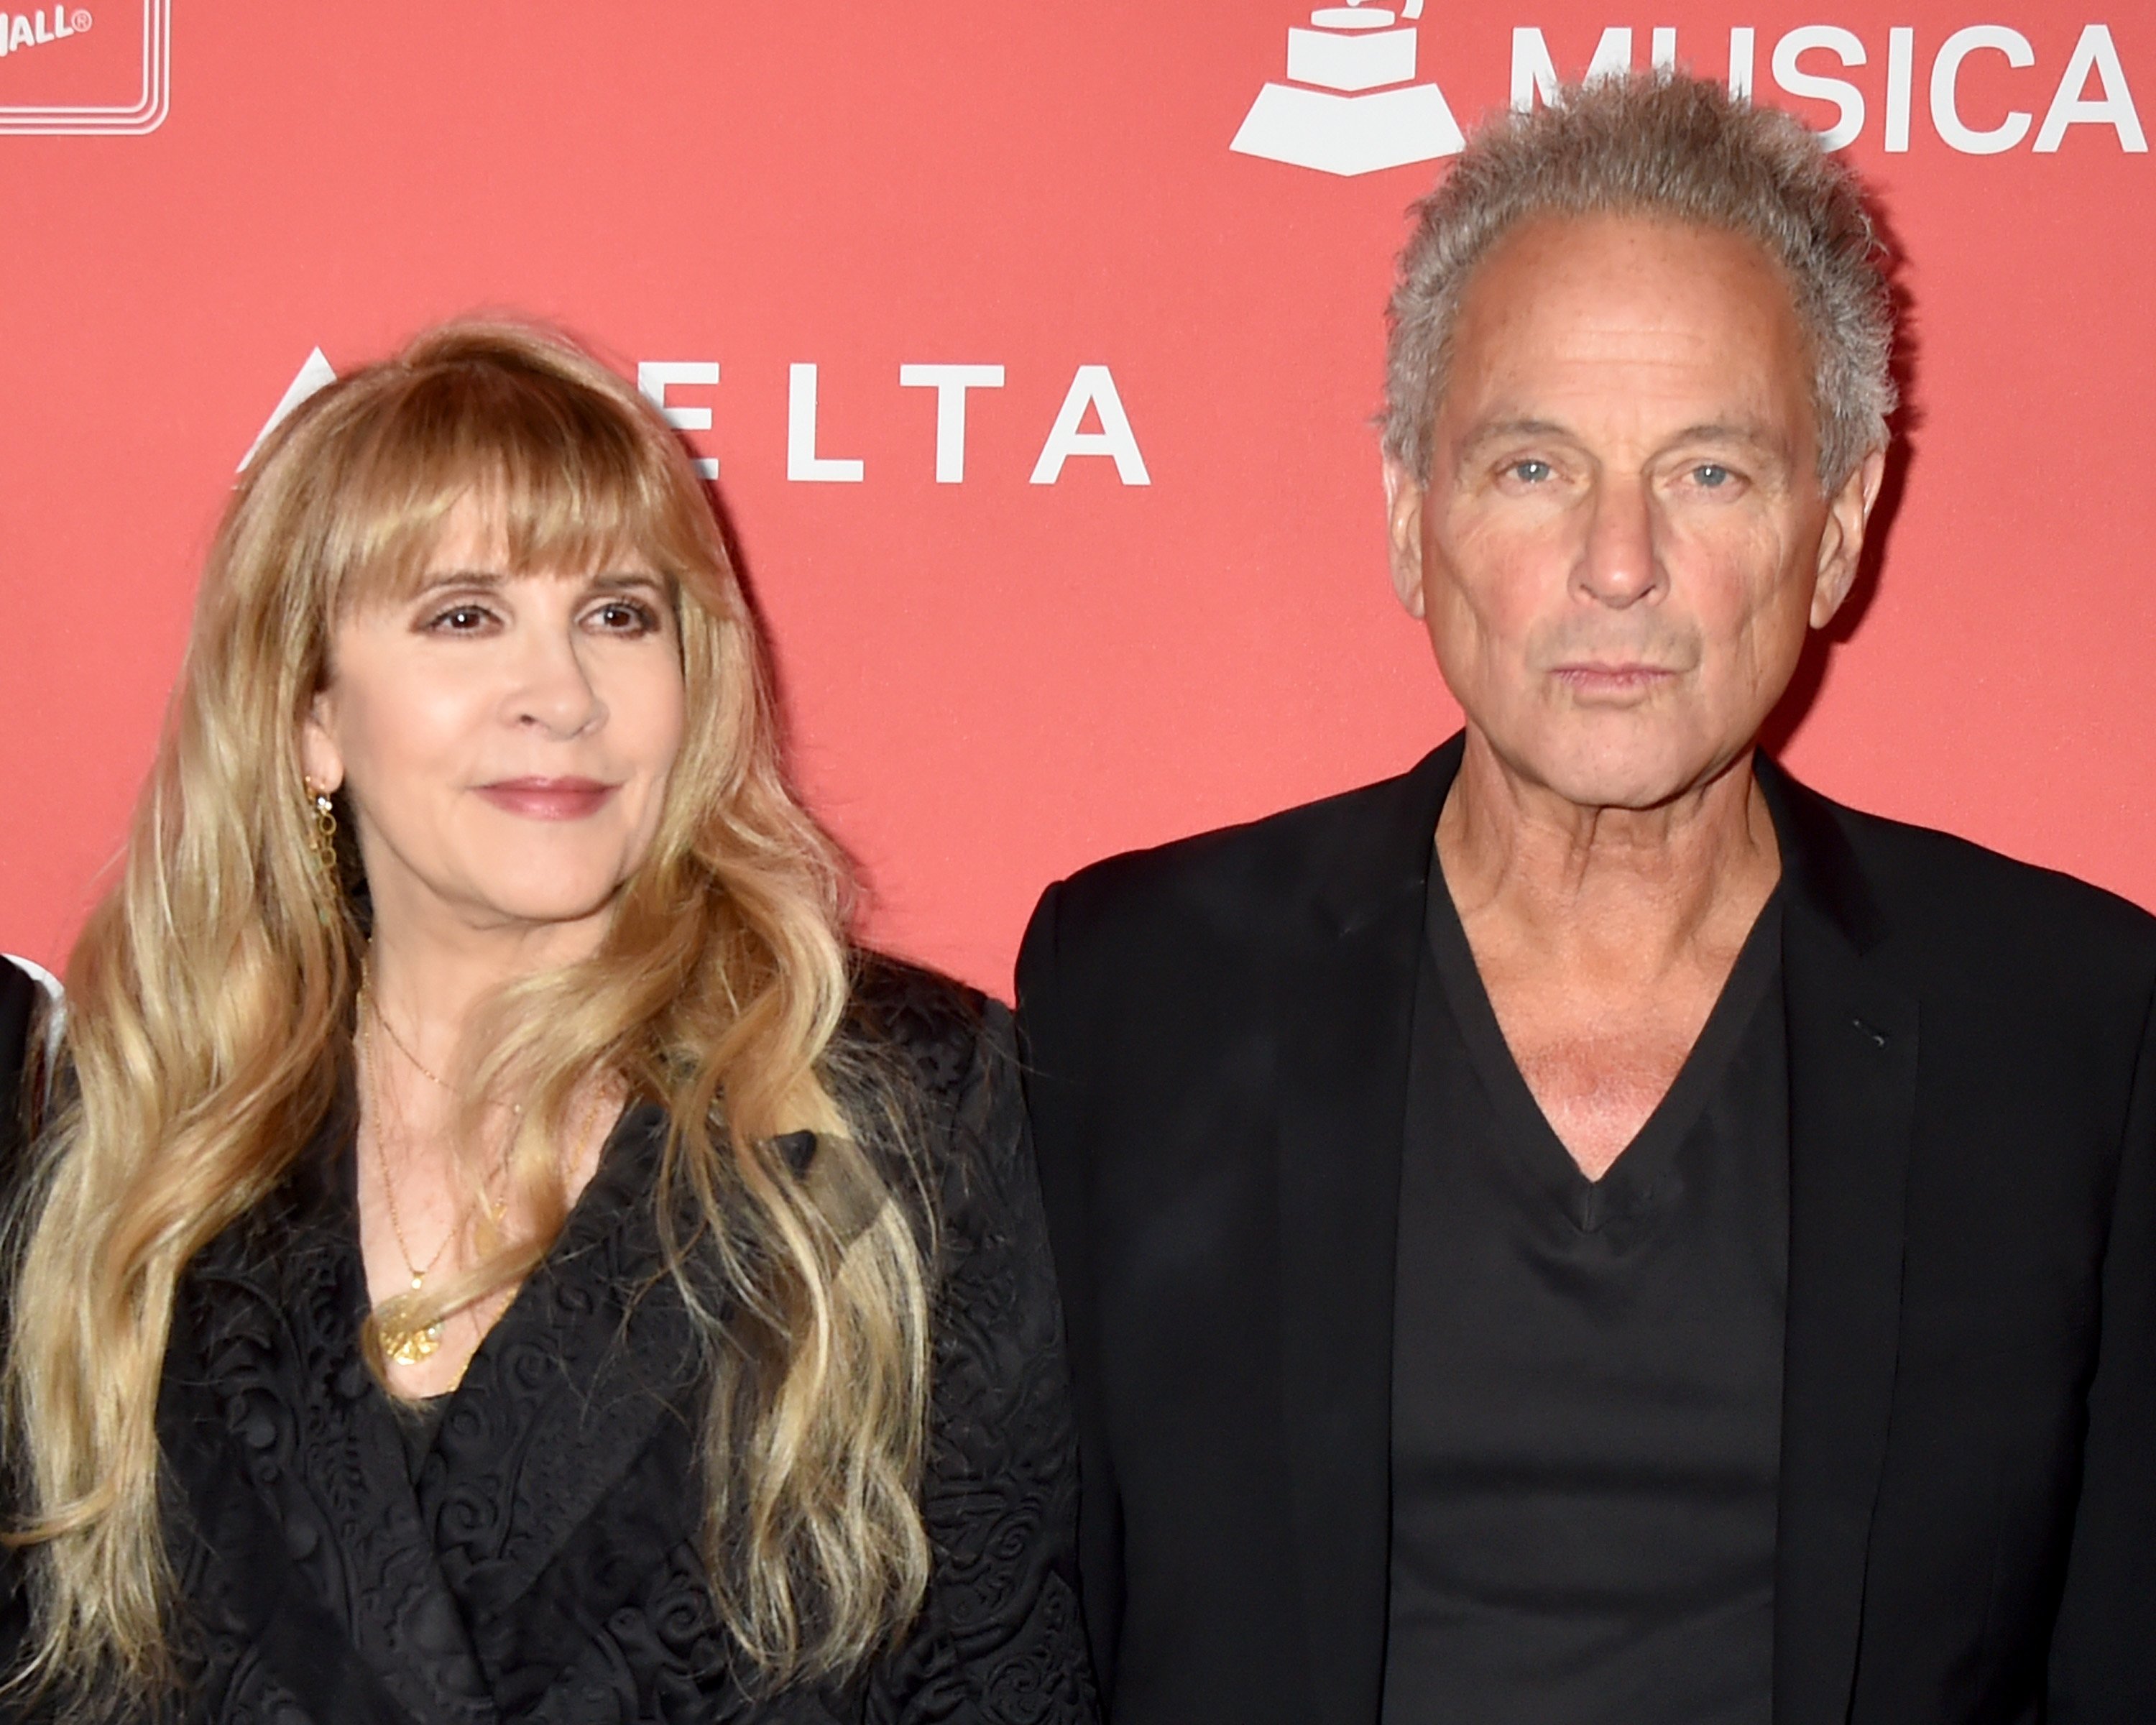 Stevie Nicks and Lindsey Buckingham stand side-by-side in black outfits